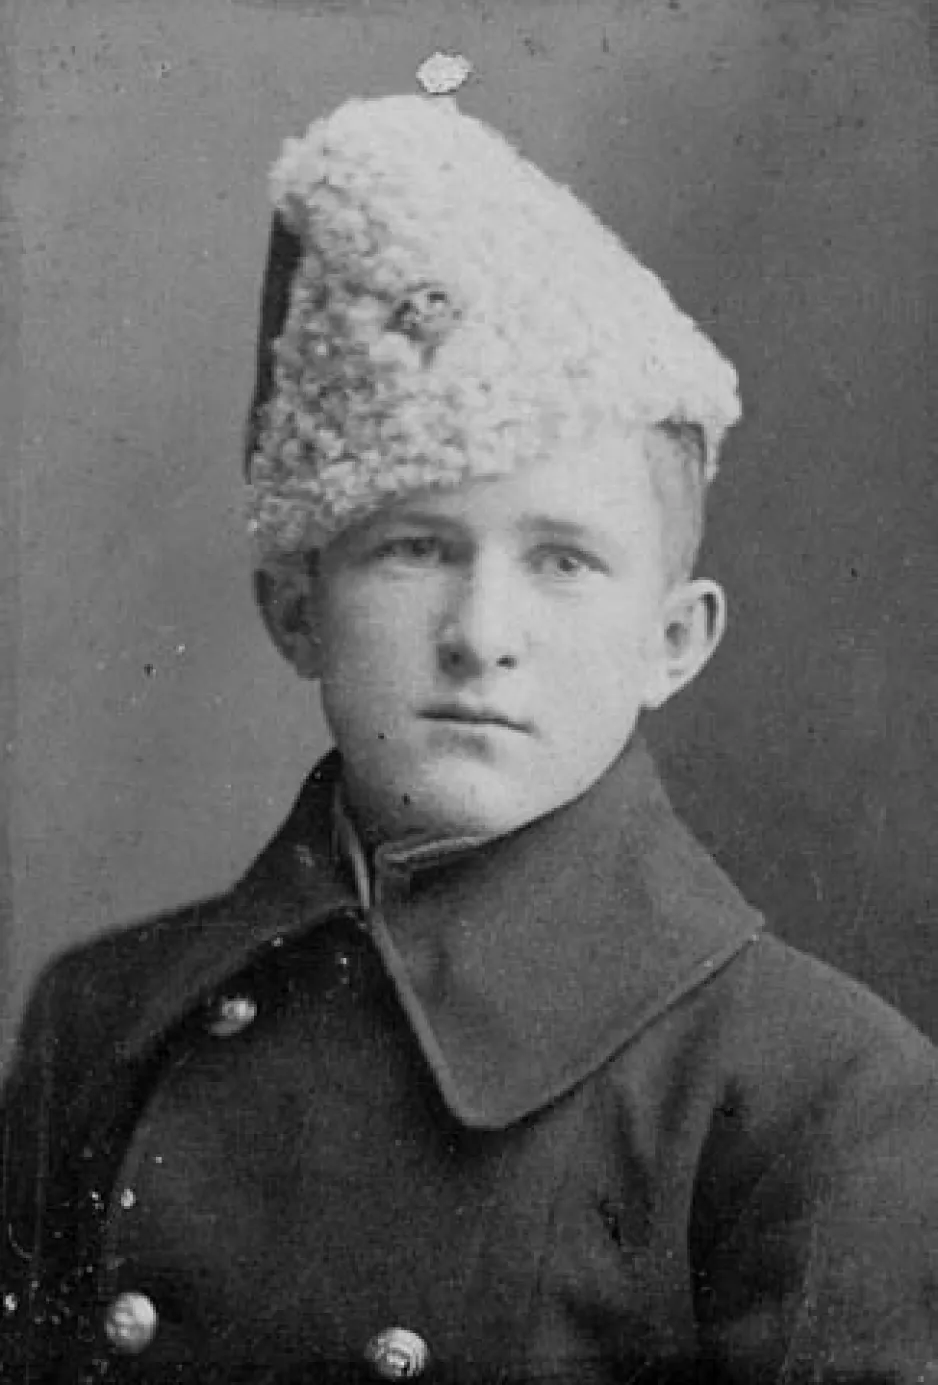 A black-and-white image of a young William Avery Bishop in his cadet uniform and hat.